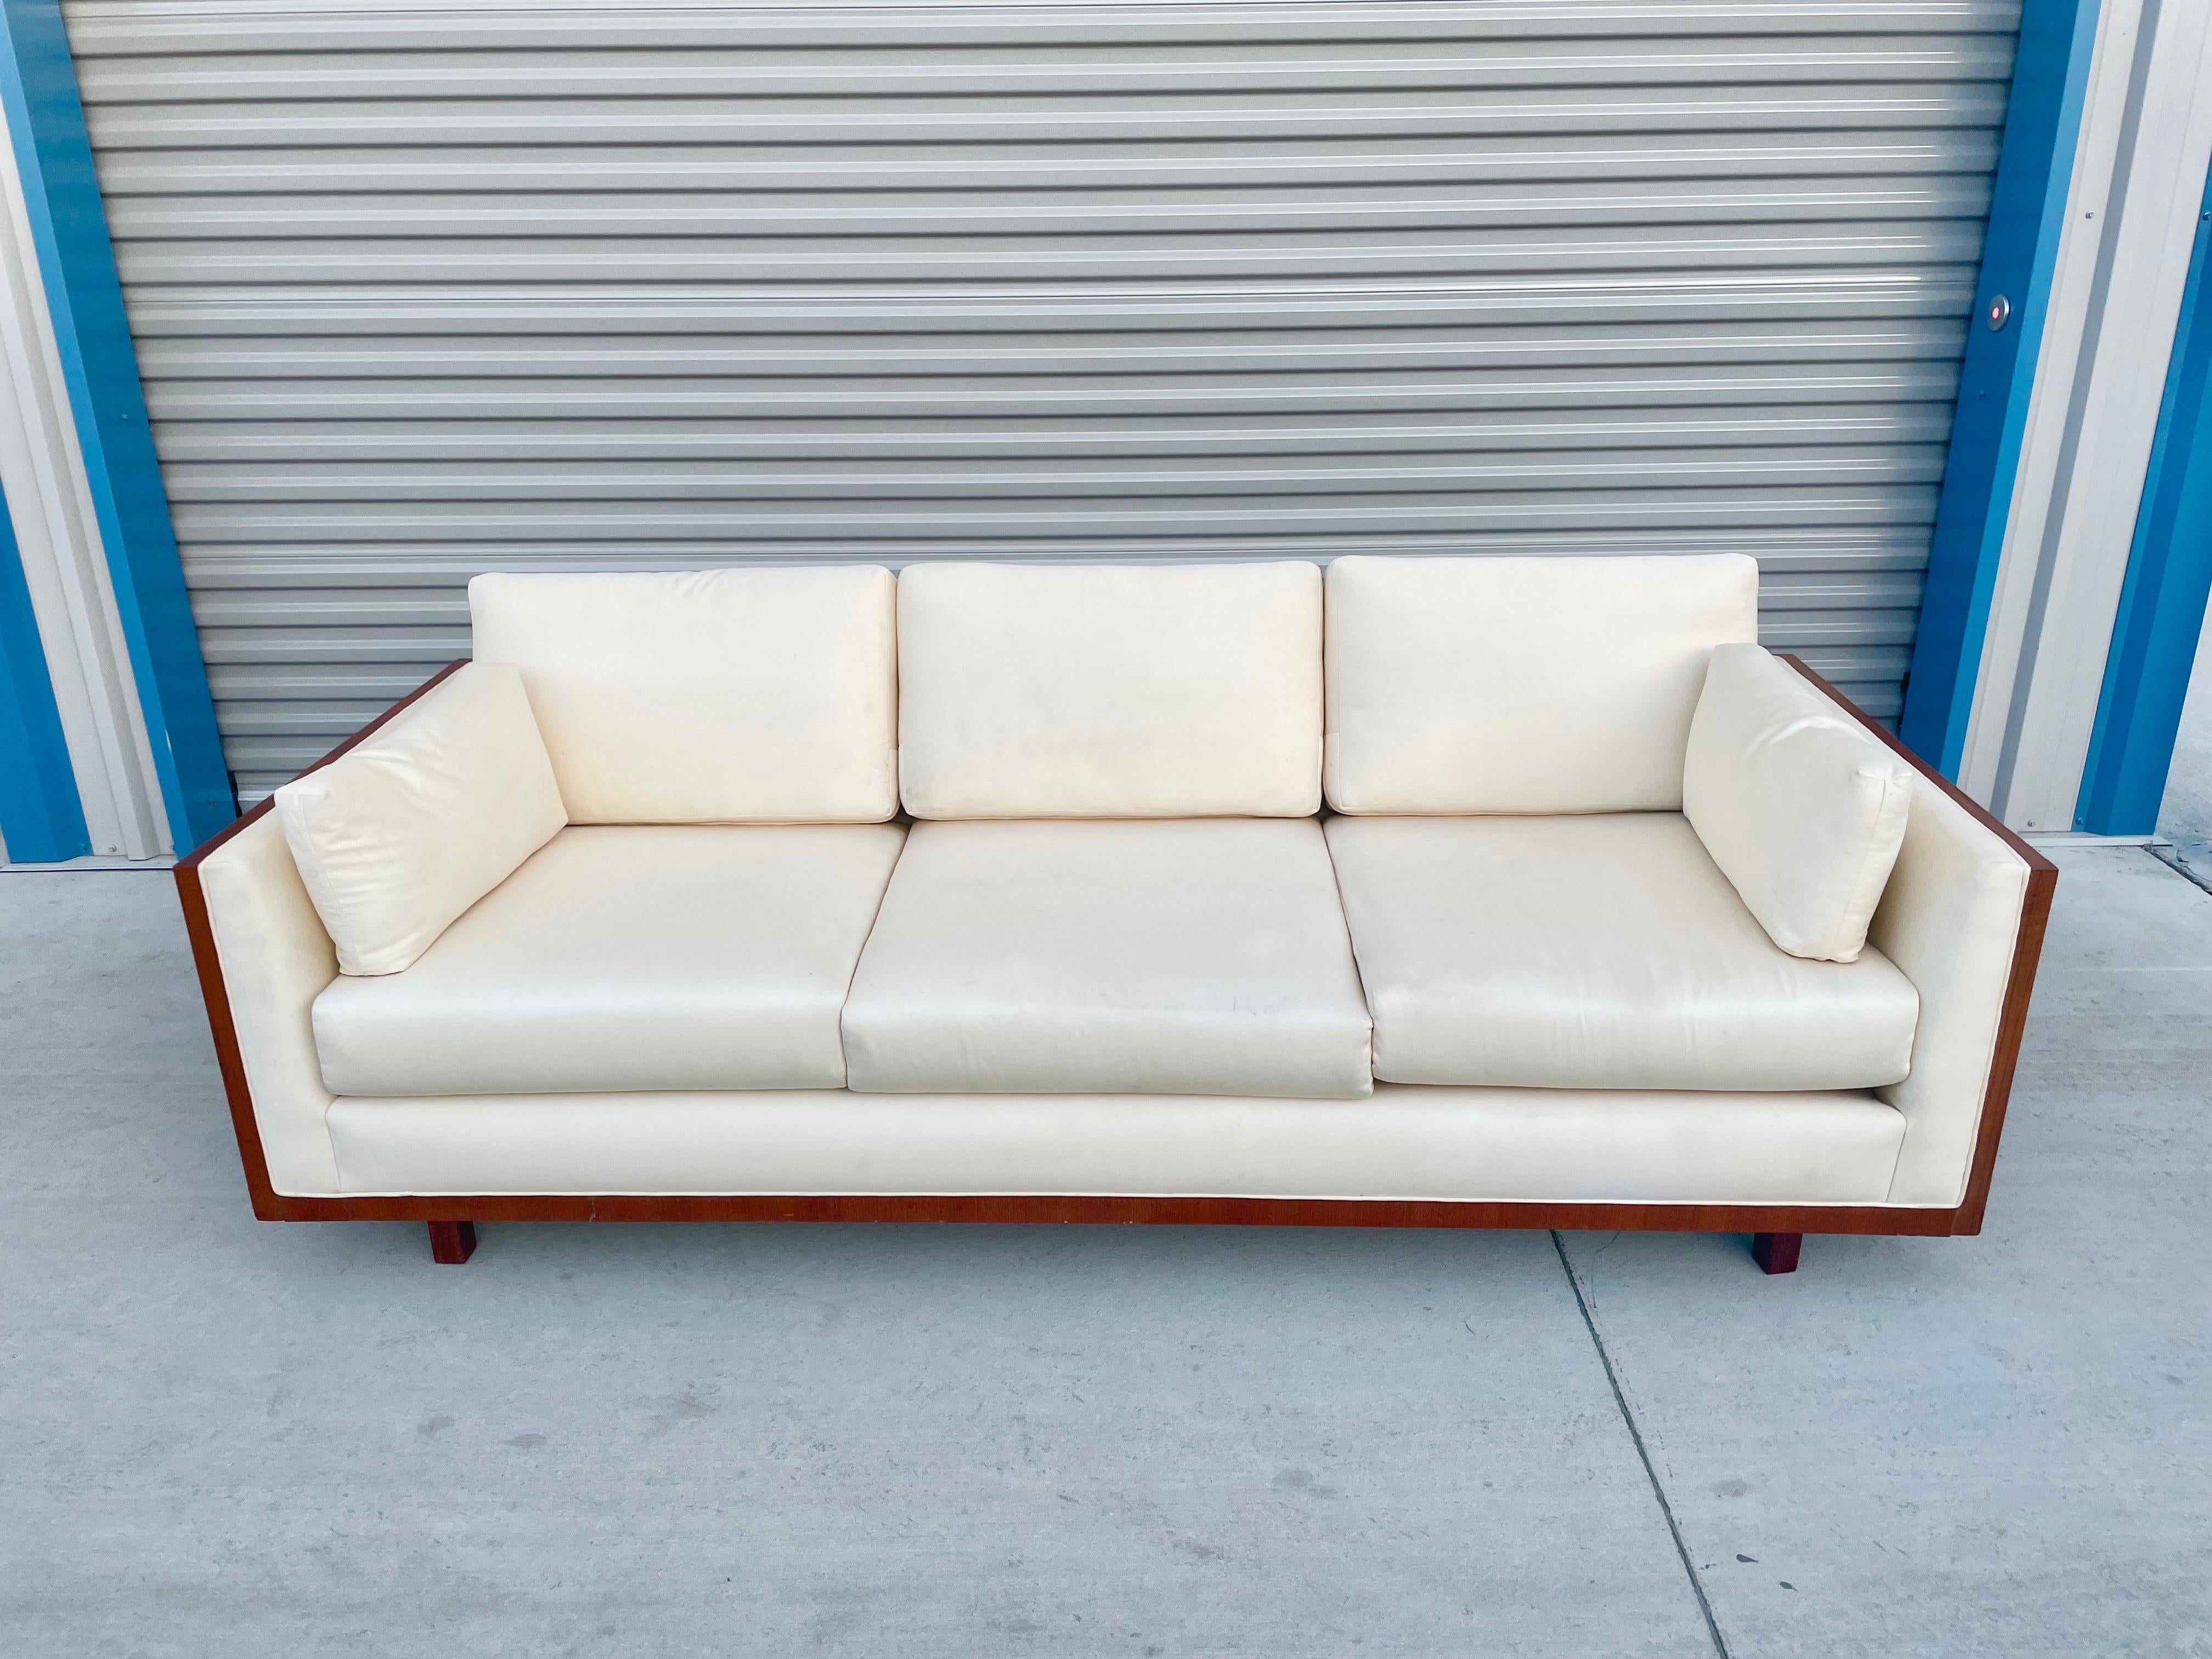 Midcentury teak sofa in the style of Milo Baughman manufactured in the united states, circa the 1960s. This vintage sofa is wrapped in the highest quality teak, giving them an excellent color tone and beautiful grain to the piece. The sofa looks